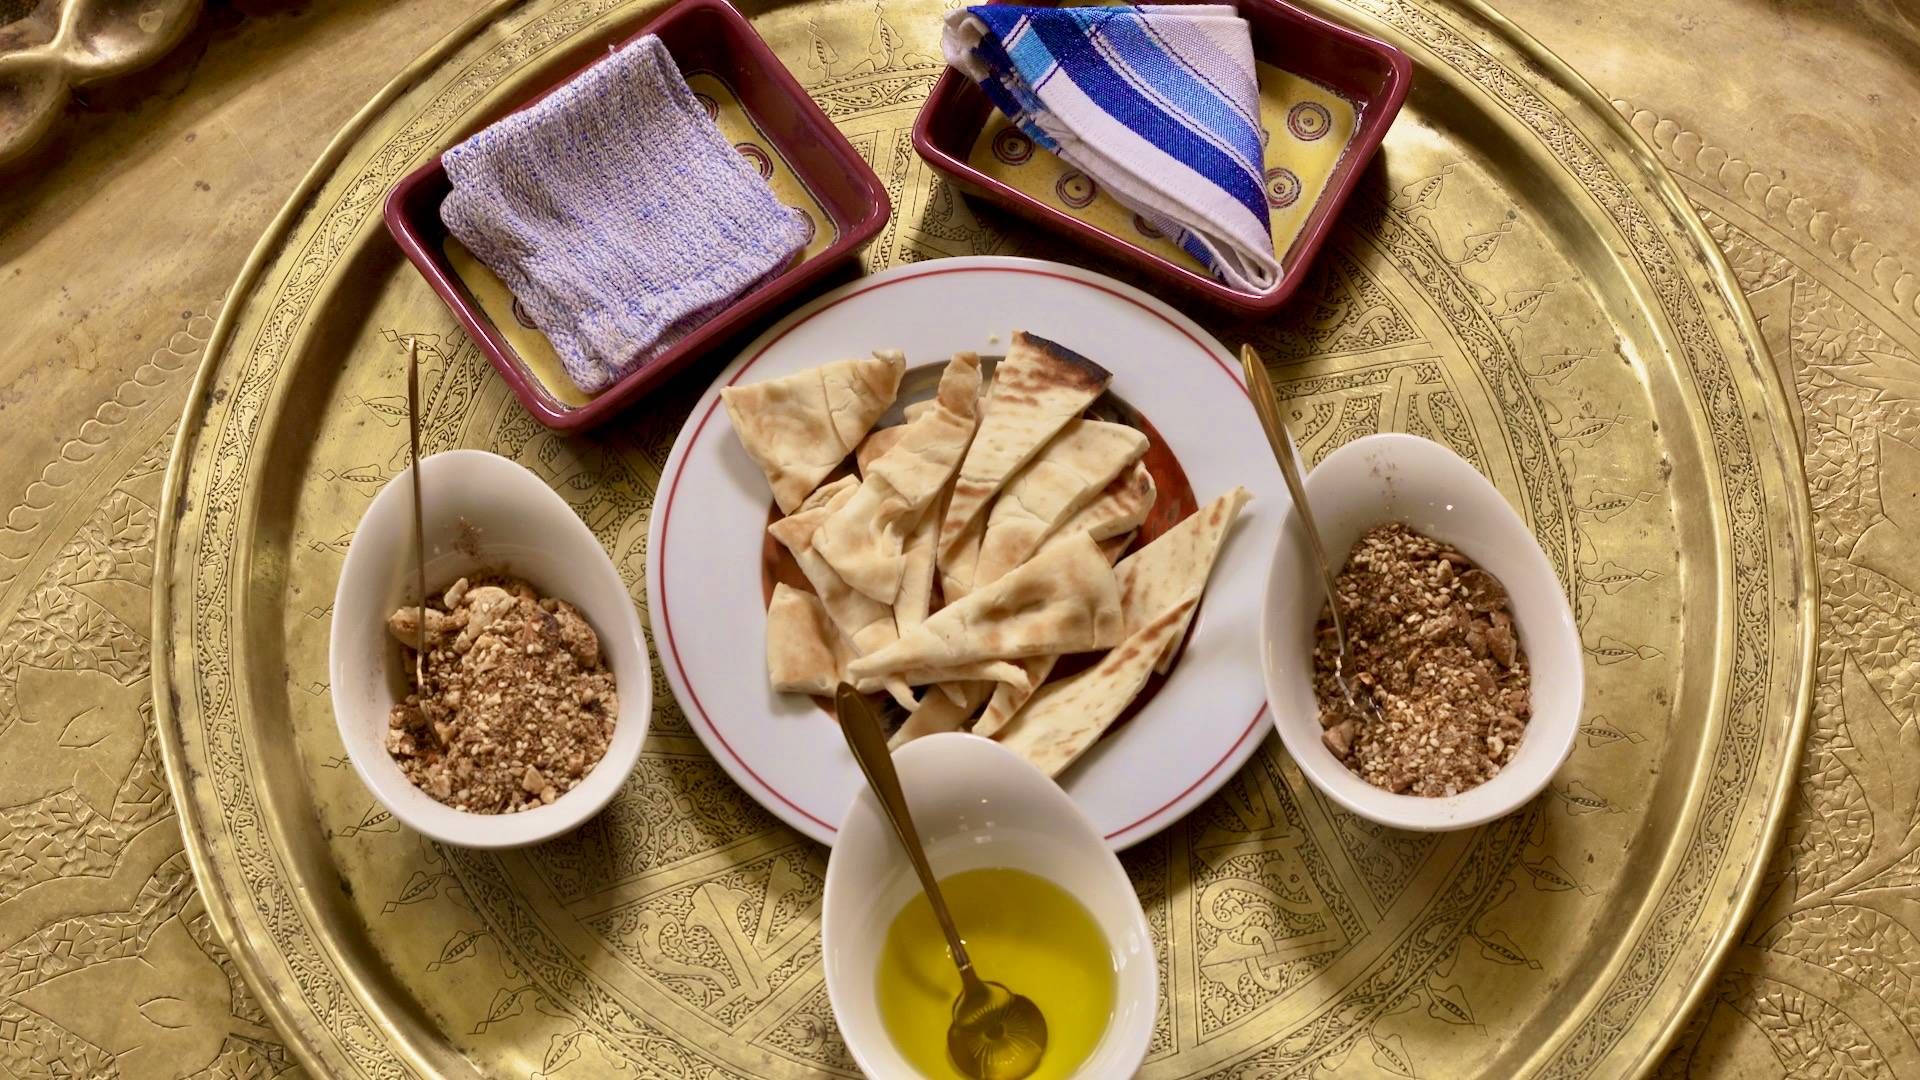 Gold platter with engravings holds two folded napkins, two small bowls of dukkah with serving spoons, a small bowl of olive oil with a serving spoon and a small plate of pita bread.